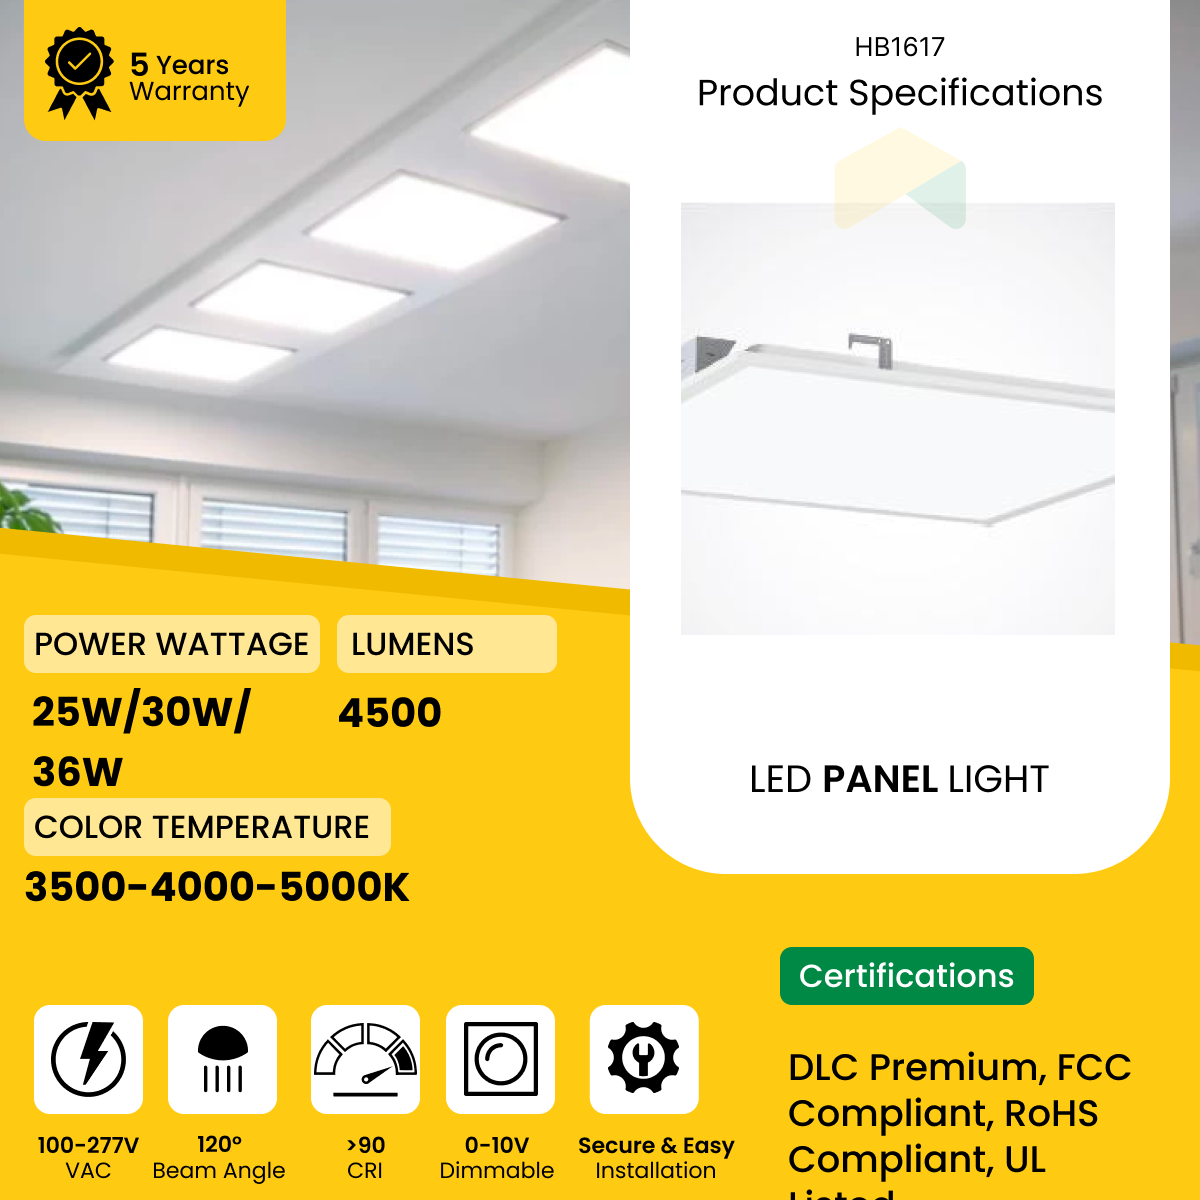 2x2 ft LED Backlite Panel - Wattage Adjustable (25W/30W/36W) - CCT Changeable (3500K/4000K/5000K) - 120-277VAC, 0-10V Dimmable - UL, DLC Premium Listed - 5 Years Warranty (2-Pack)